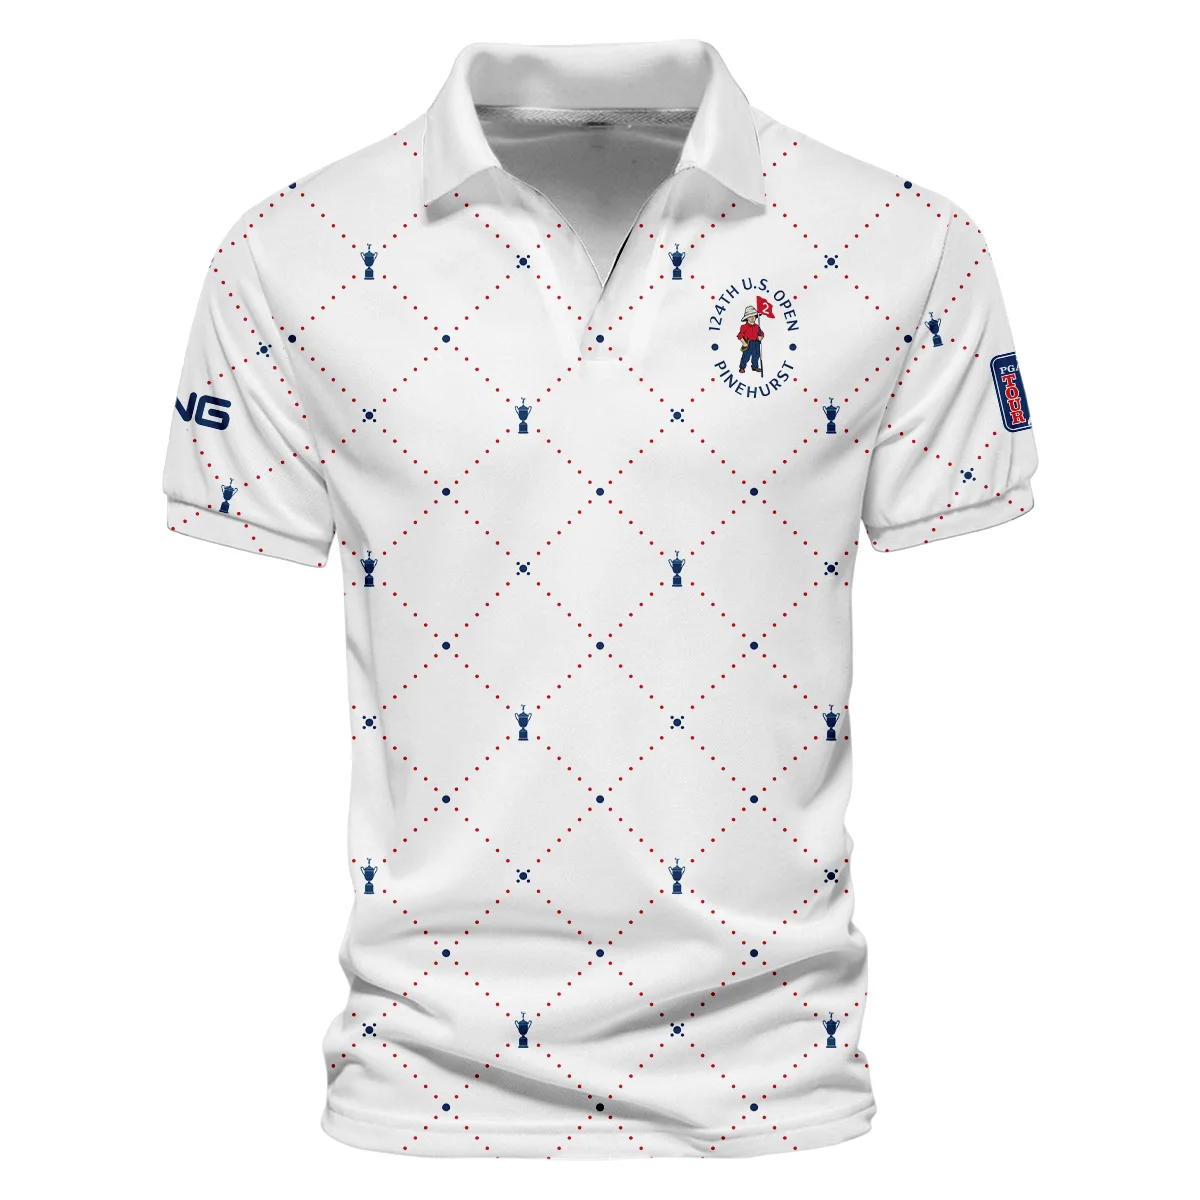 Argyle Pattern With Cup 124th U.S. Open Pinehurst Ping Vneck Polo Shirt Style Classic Polo Shirt For Men